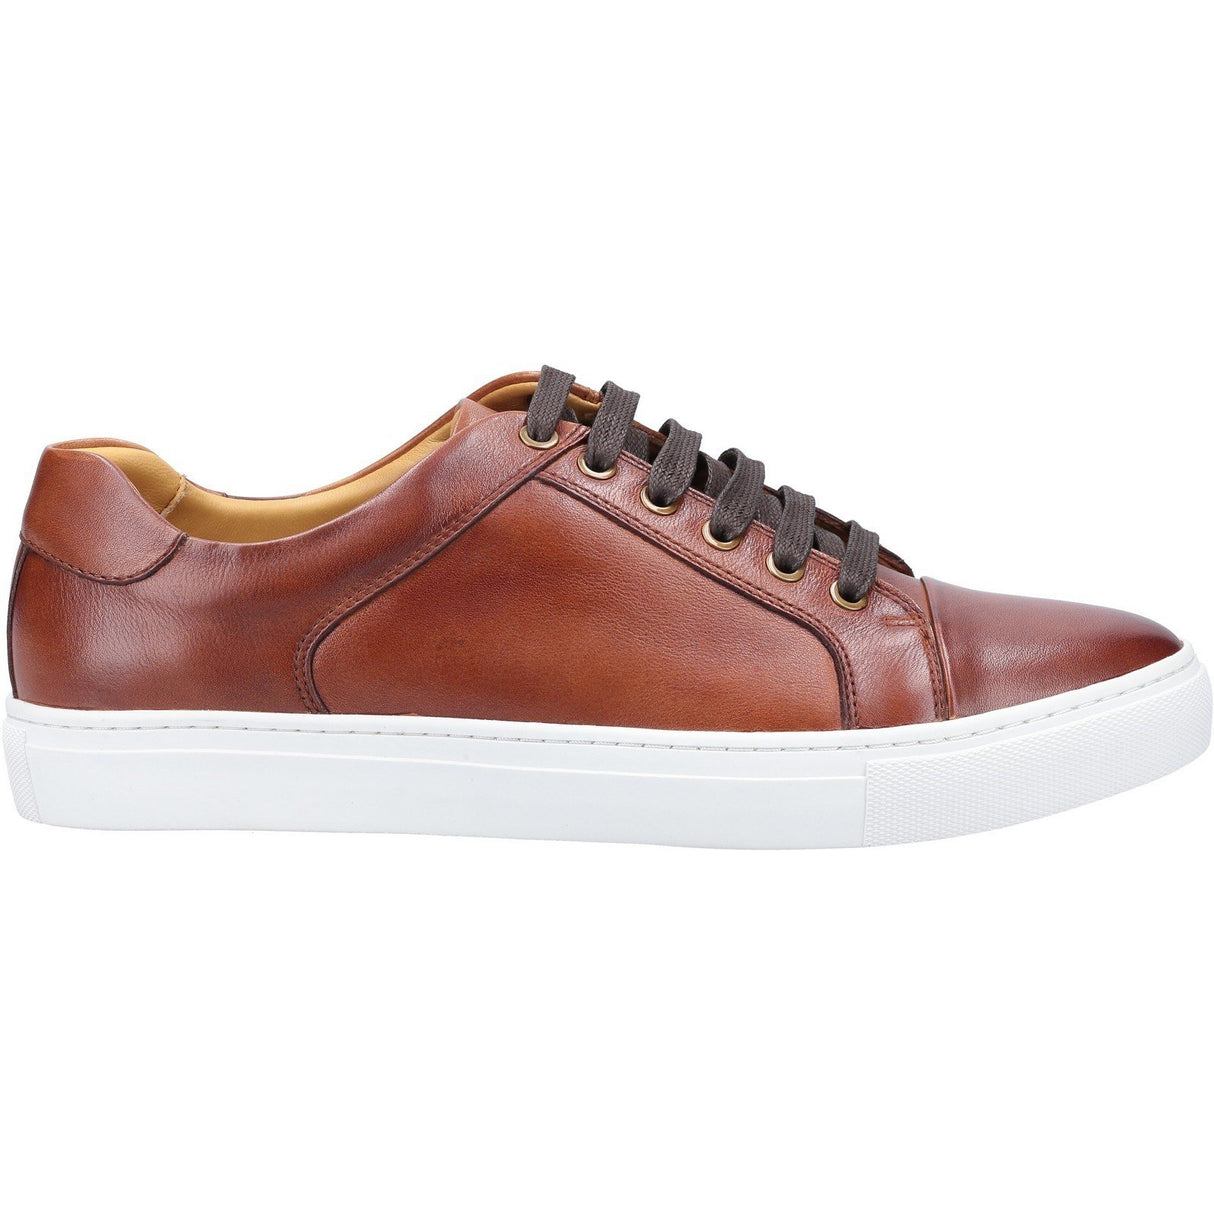 Steptronic Yale Men's Lace-up Trainers